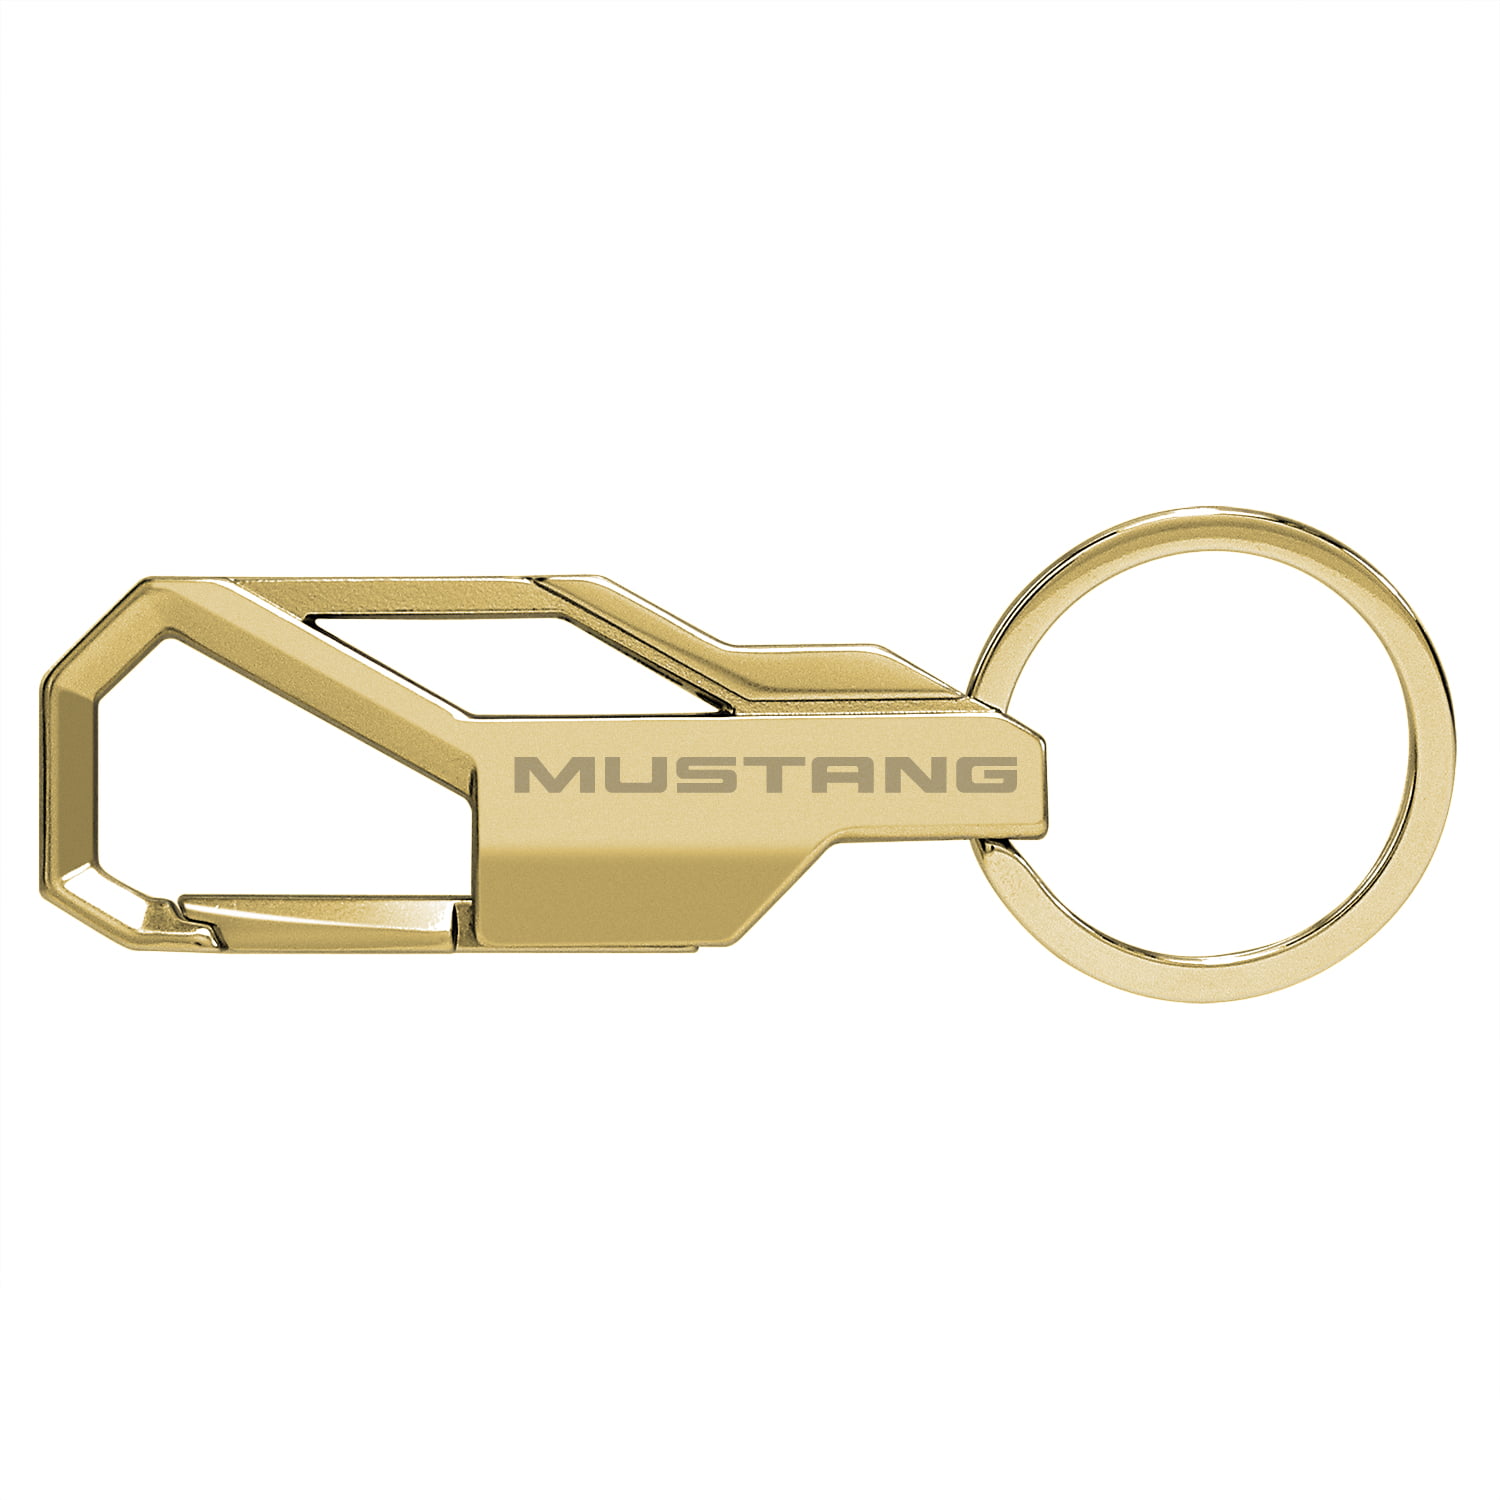 Ford Mustang 5.0 Golden Snap Hook Metal Key Chain 